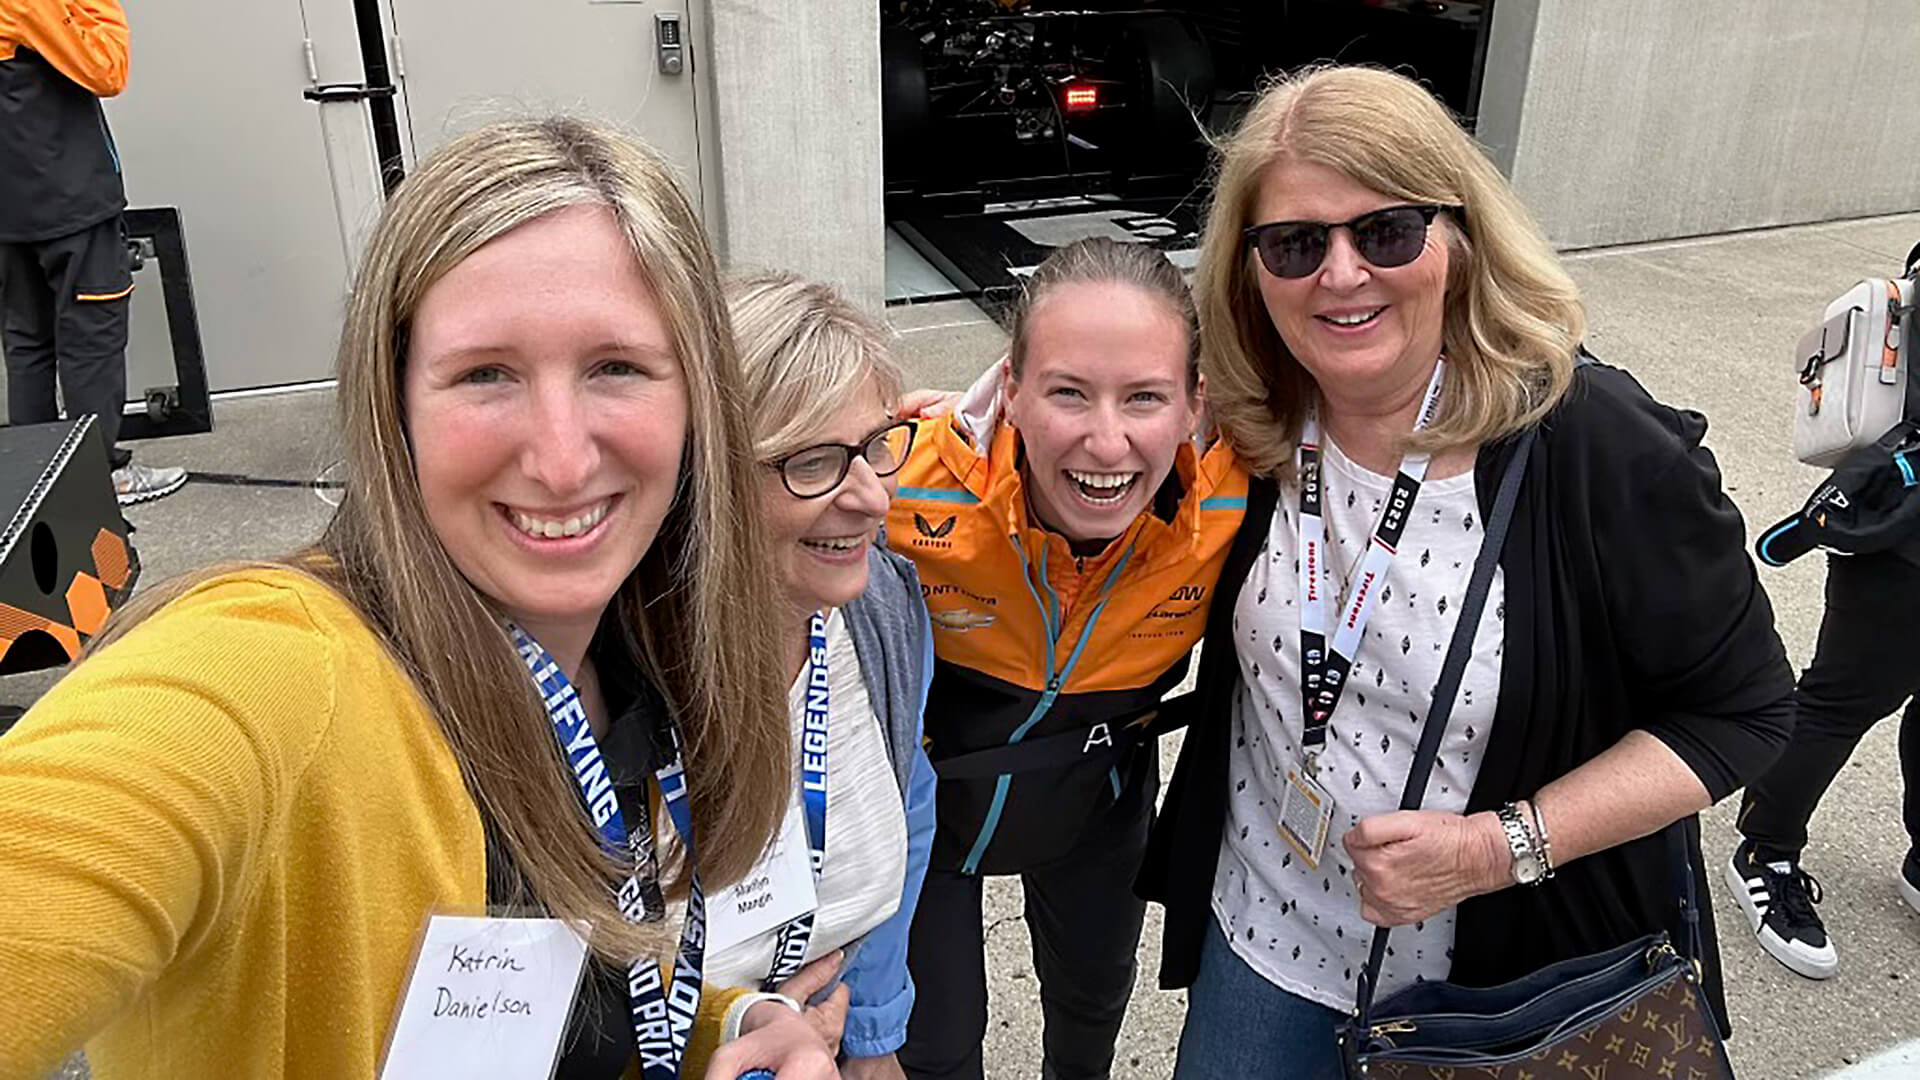 Lizzie Todd and Terri Talbert-Hatch pose for a selfie with friends at the Indianapolis Motor Speedway